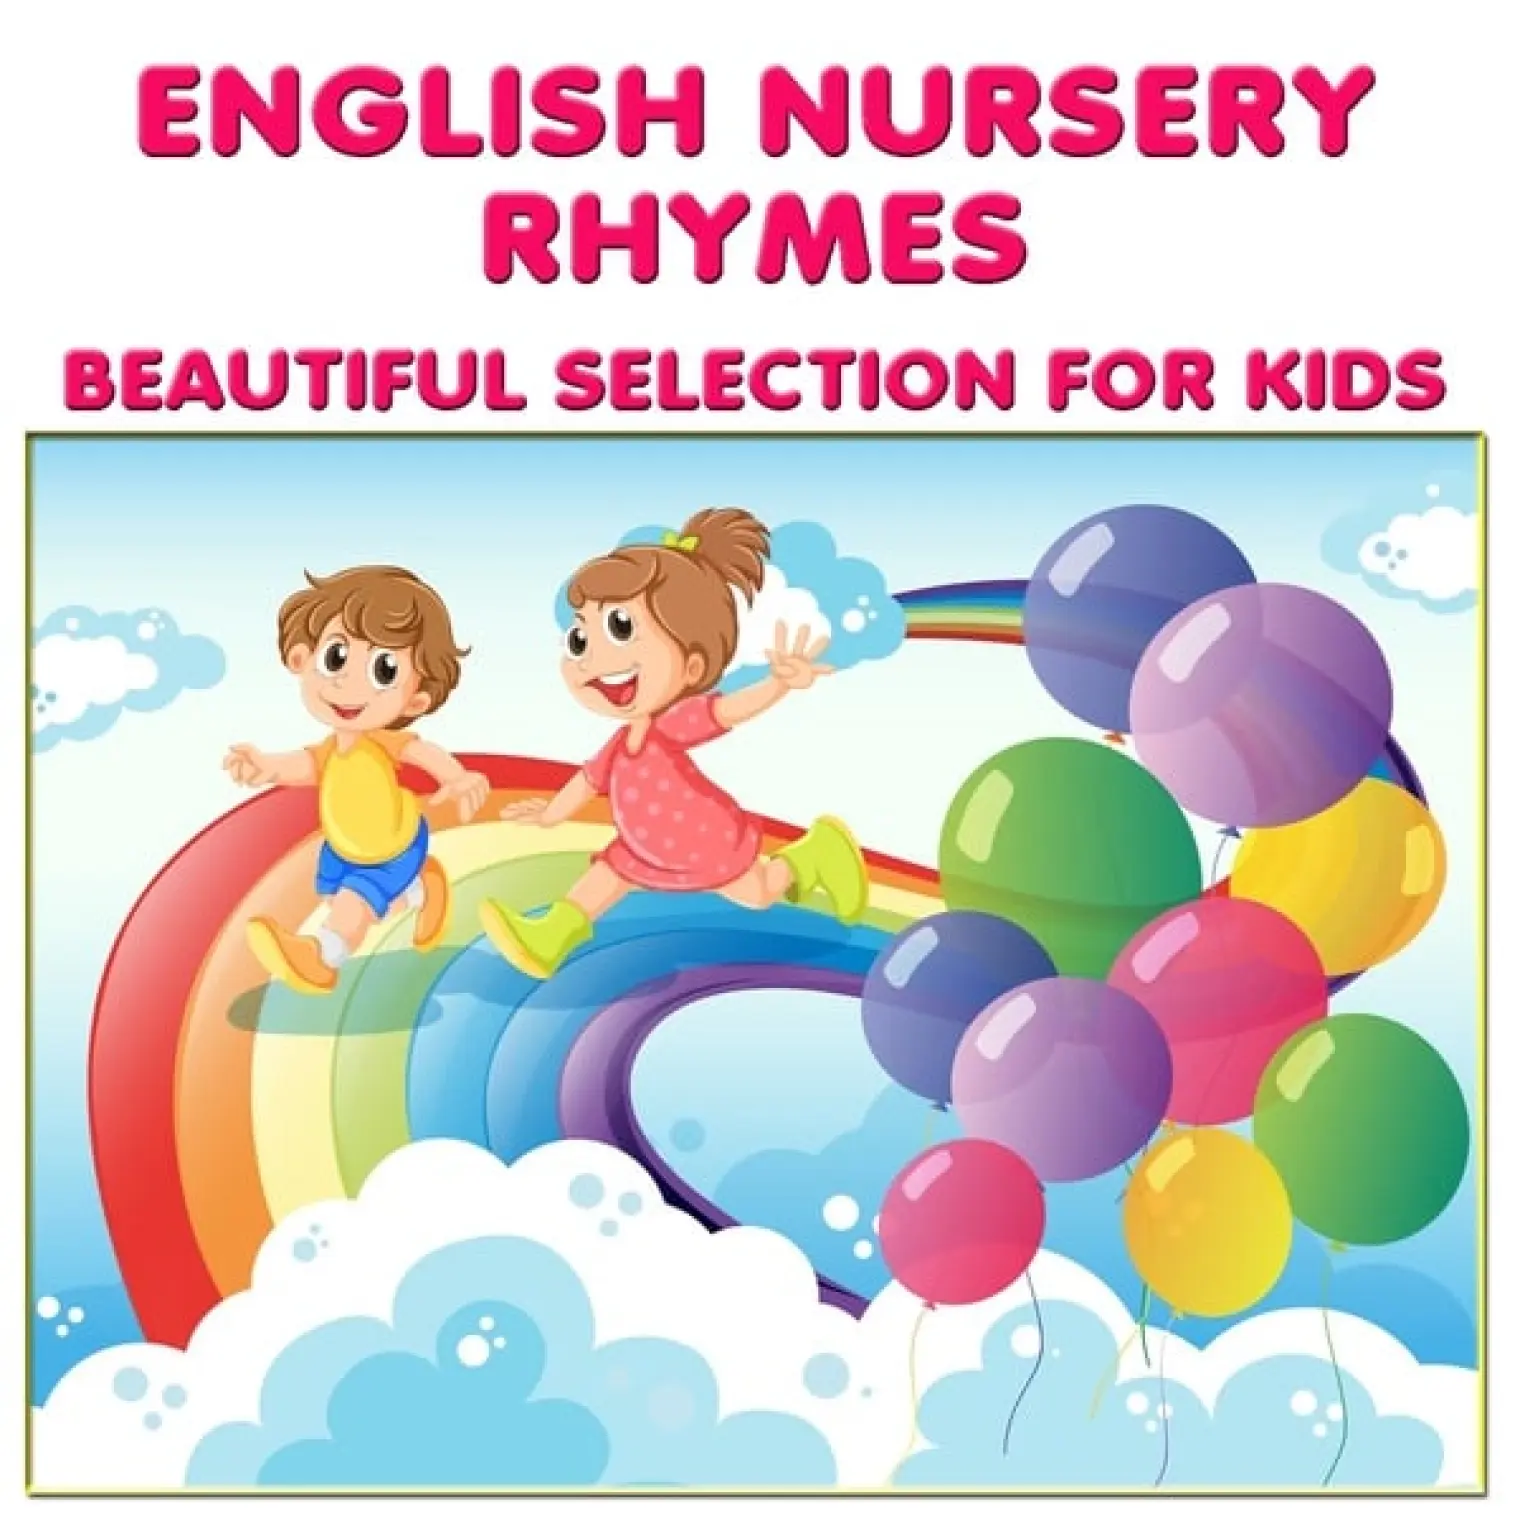 English Nursery Rhymes: Beautiful Selection for Kids (Best Kids Songs Collection) -  Kids Songs 